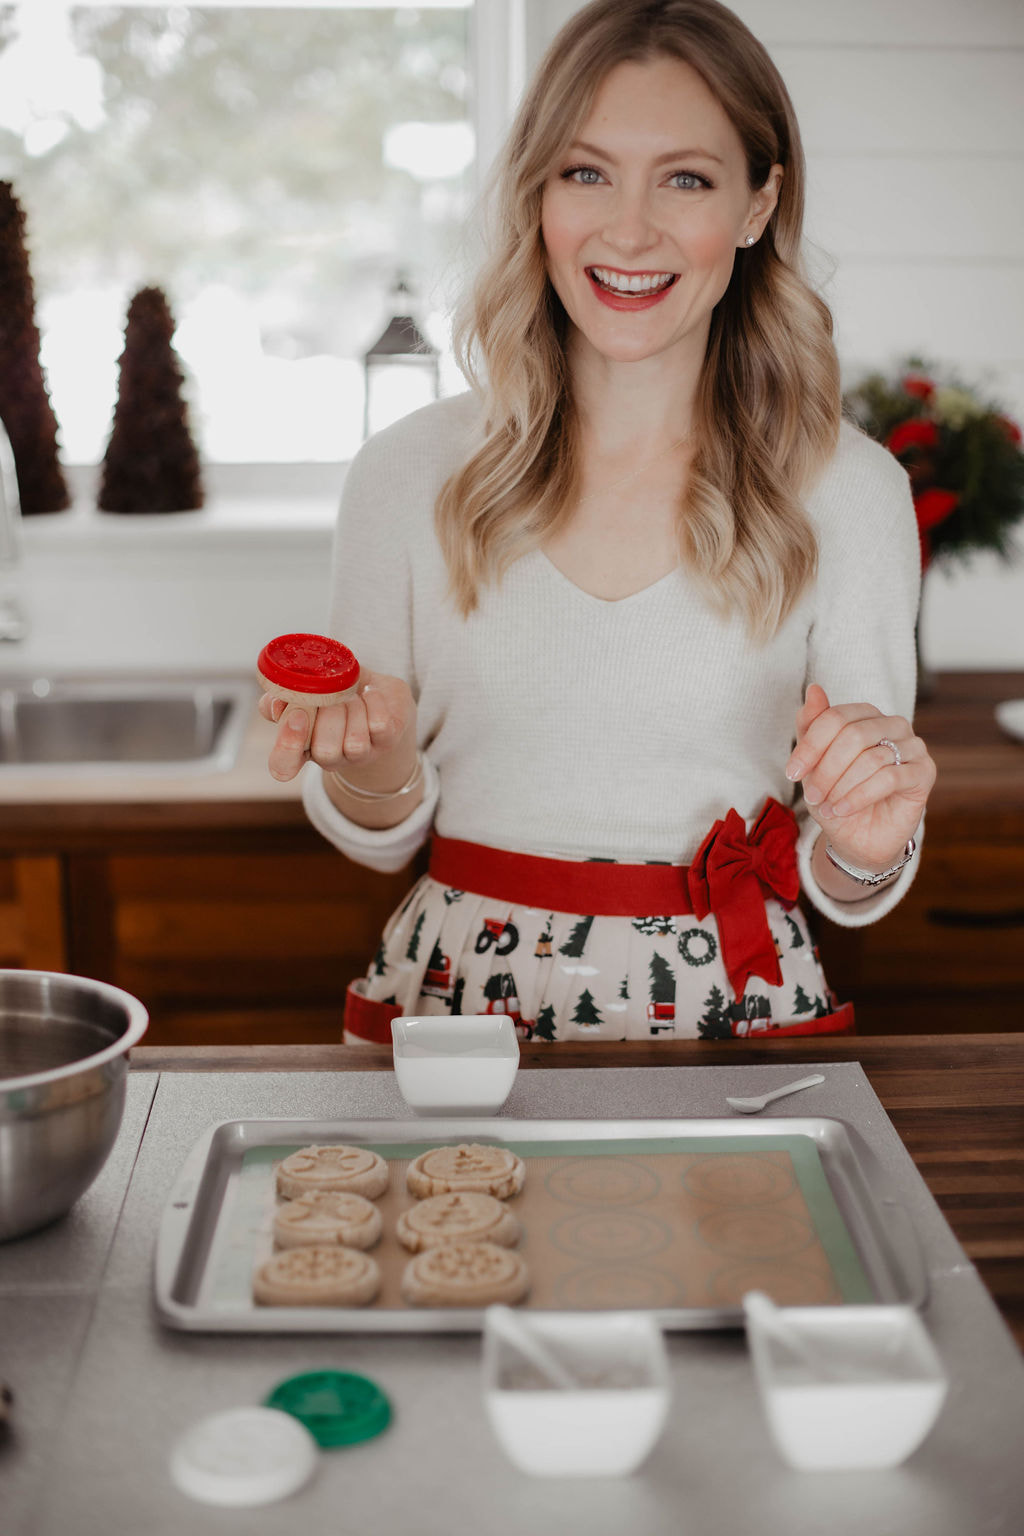 Baking Christmas Cookies Using A Cookie Stamp